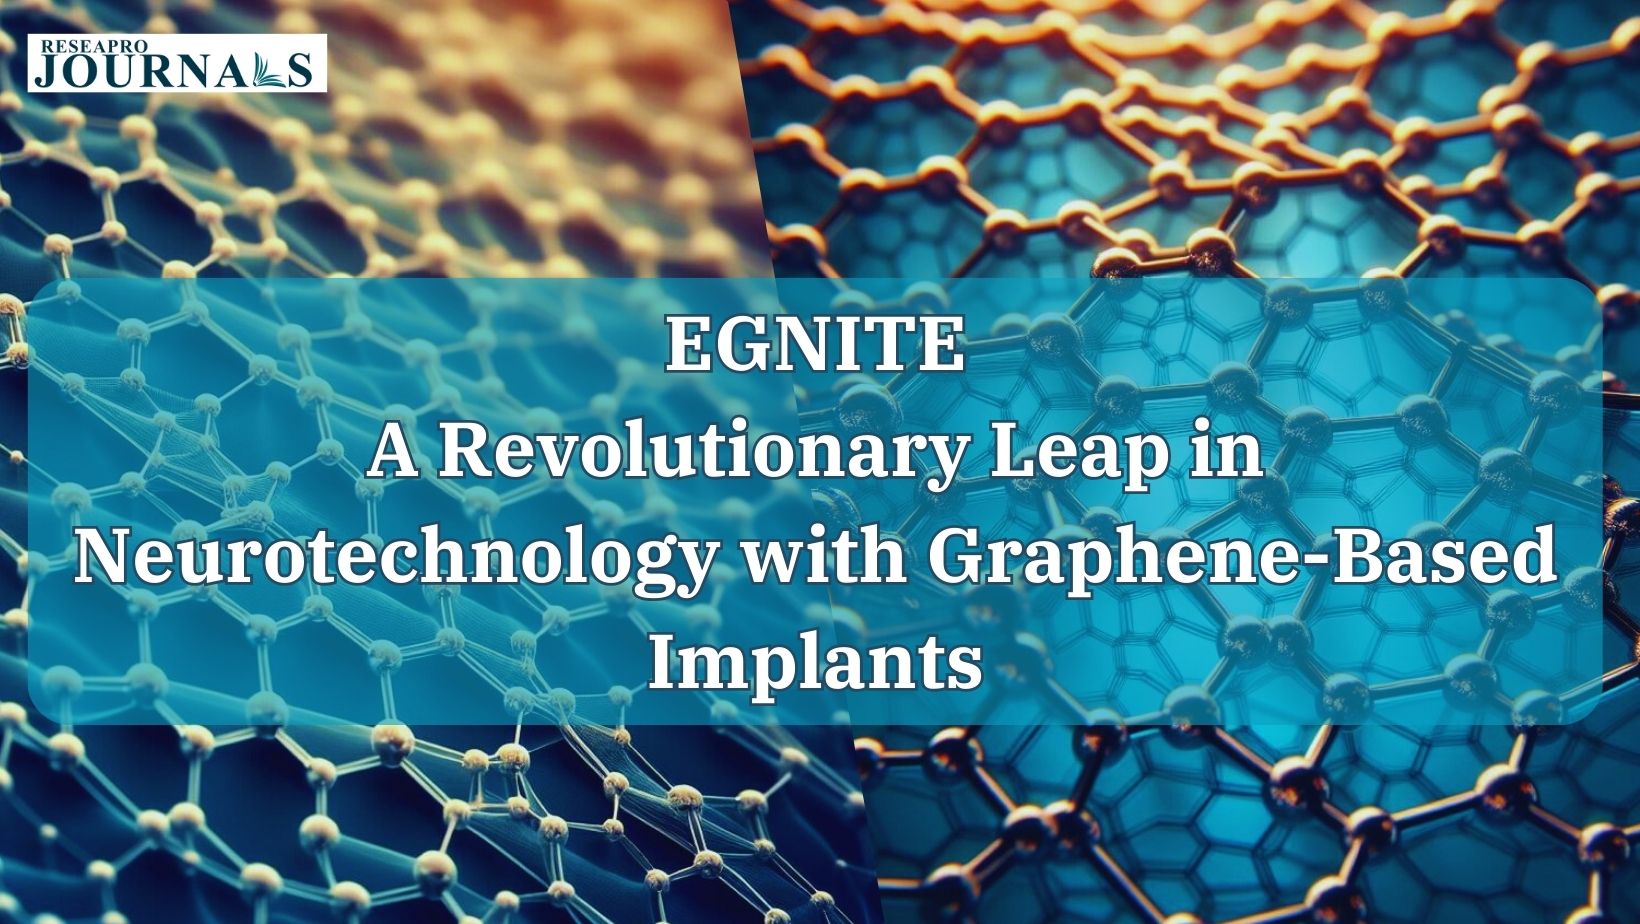 EGNITE: A Revolutionary Leap in Neurotechnology with Graphene-Based Implants